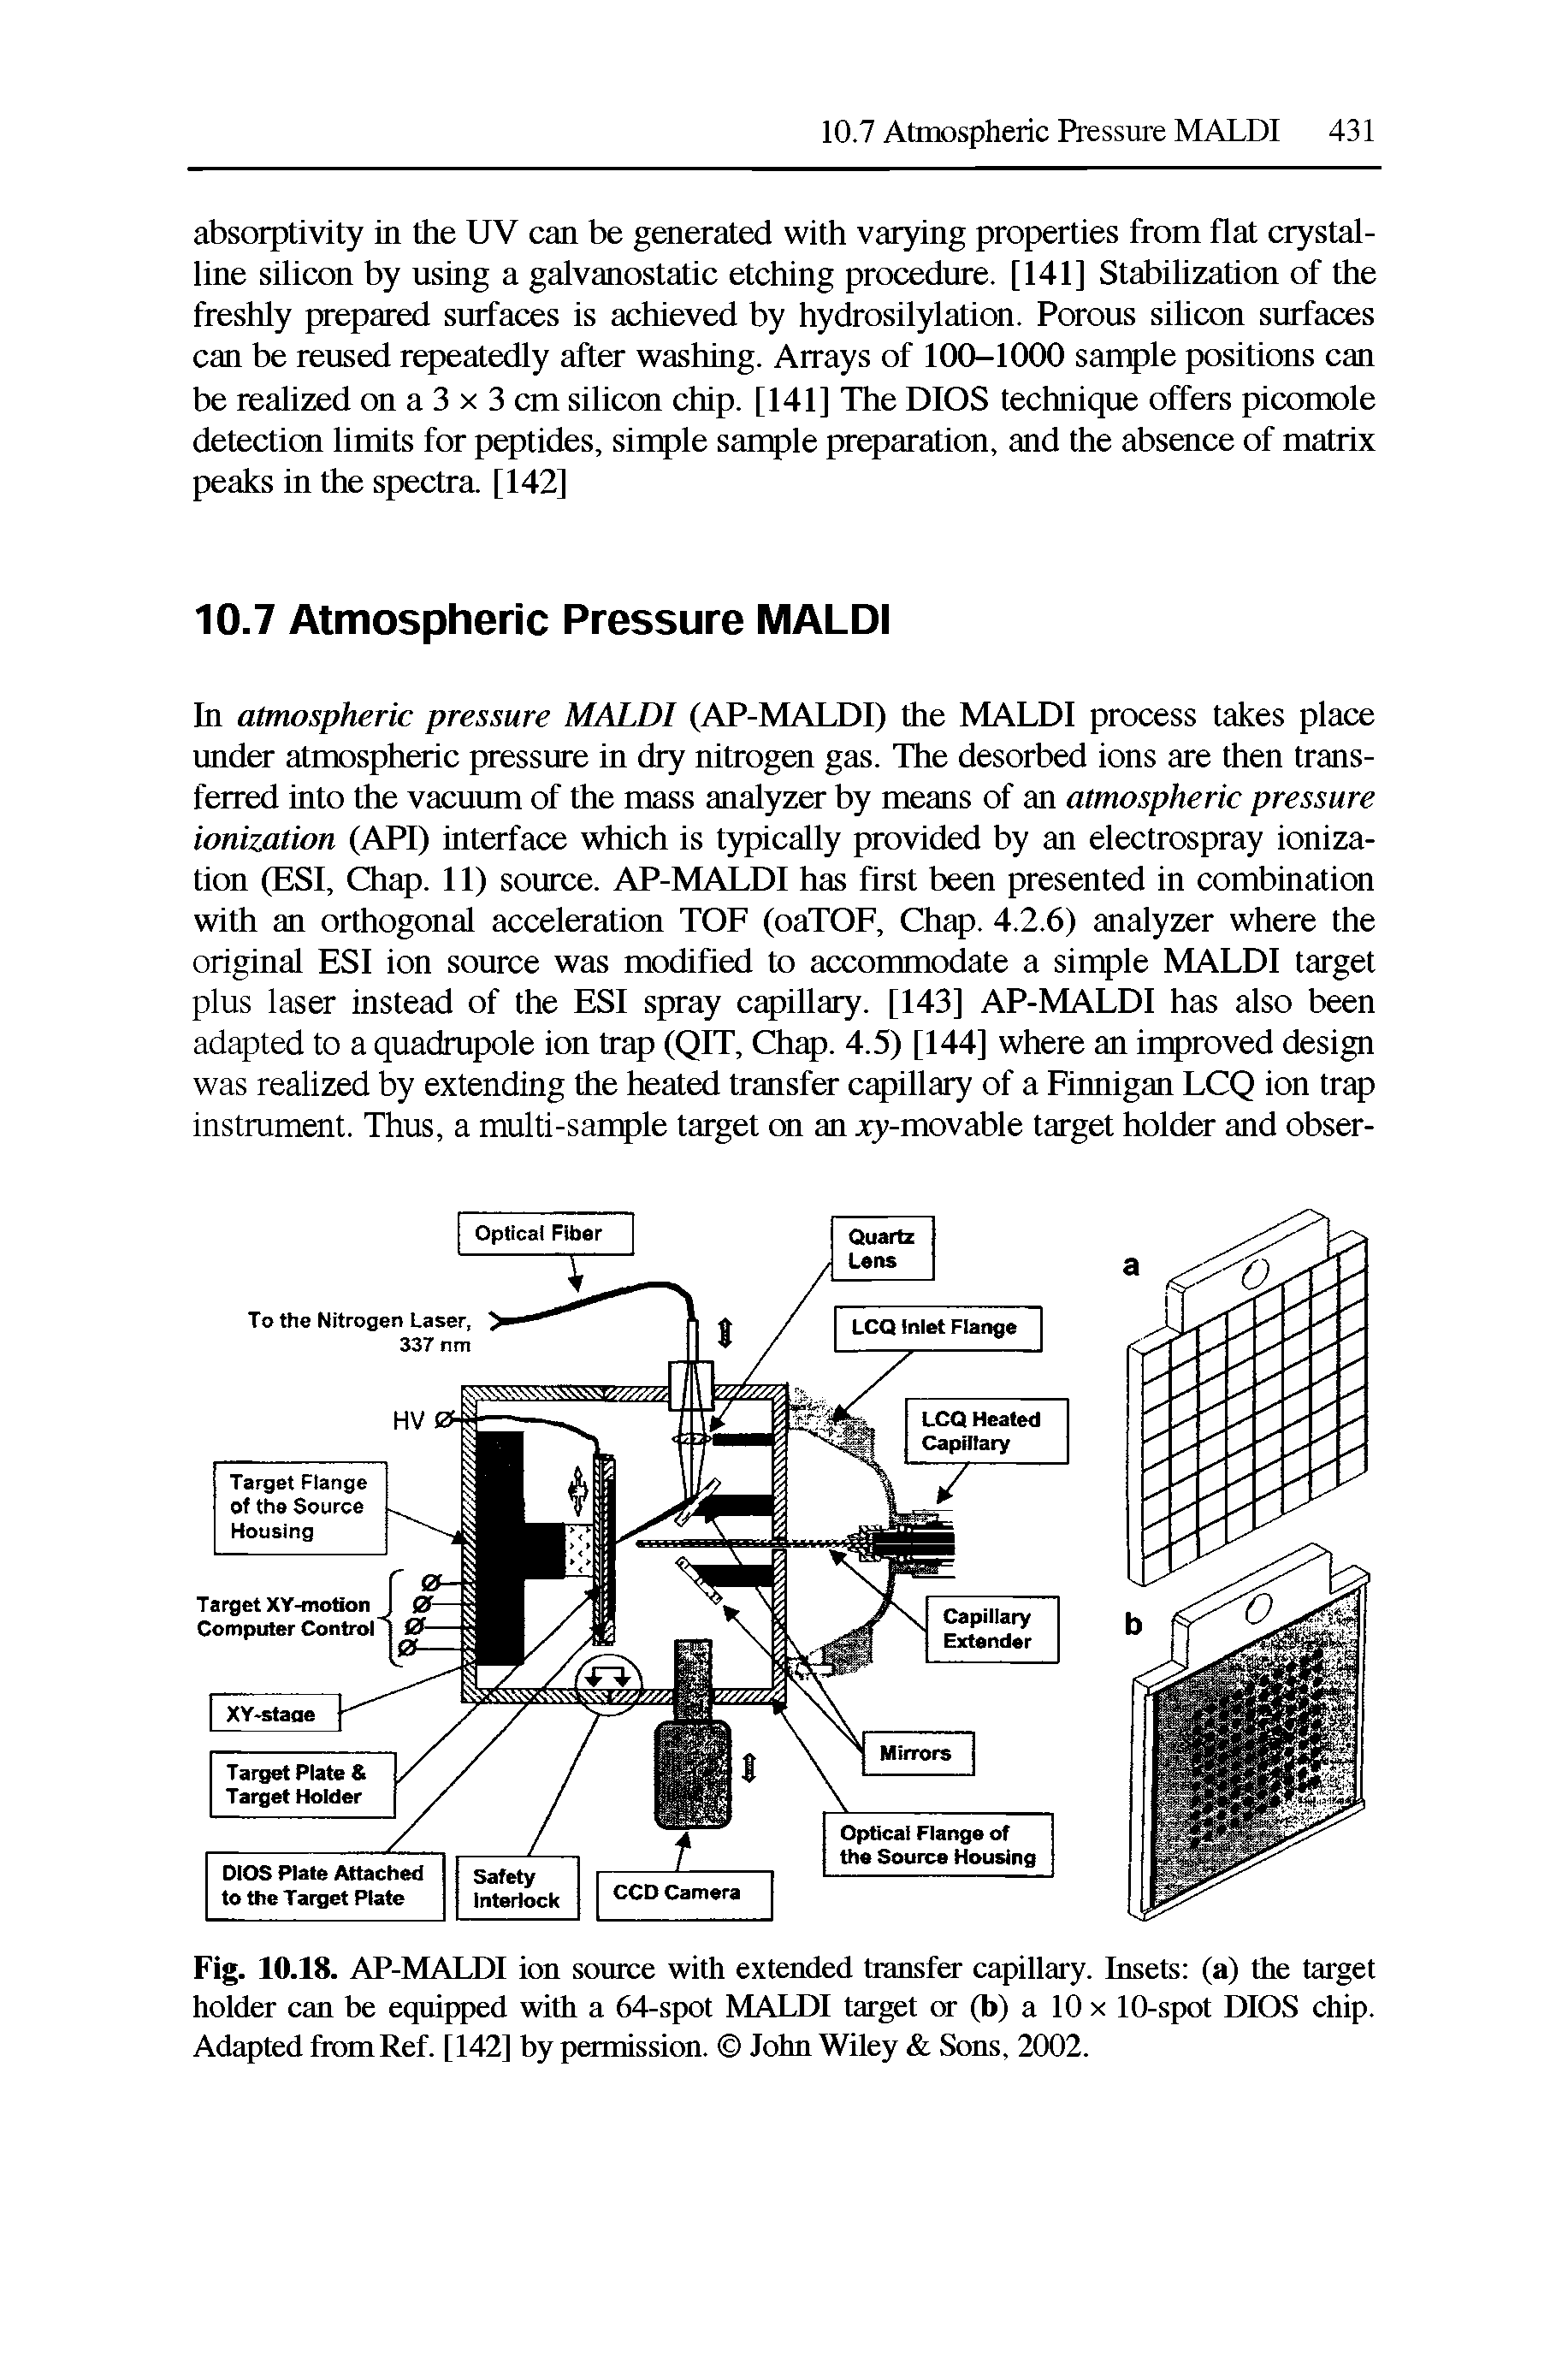 Fig. 10.18. AP-MALDI ion source with extended transfer capillary. Insets (a) the target holder can be equipped with a 64-spot MALDI target or (b) a 10 x 10-spot DIOS chip. Adapted fromRef. [142] by permission. John Wiley Sons, 2002.